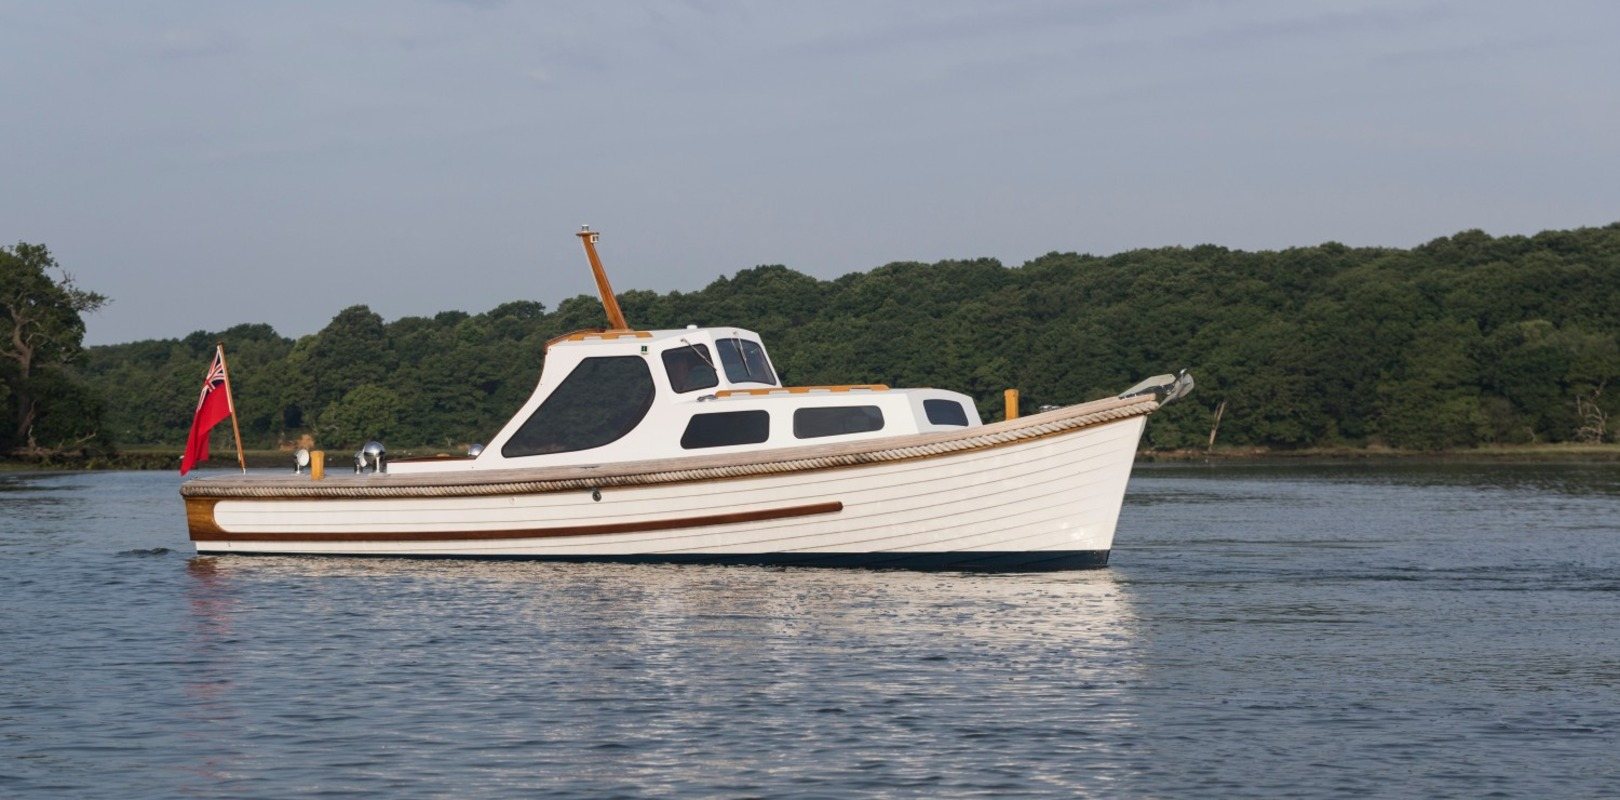 Private pleasure craft boat sailing on the water